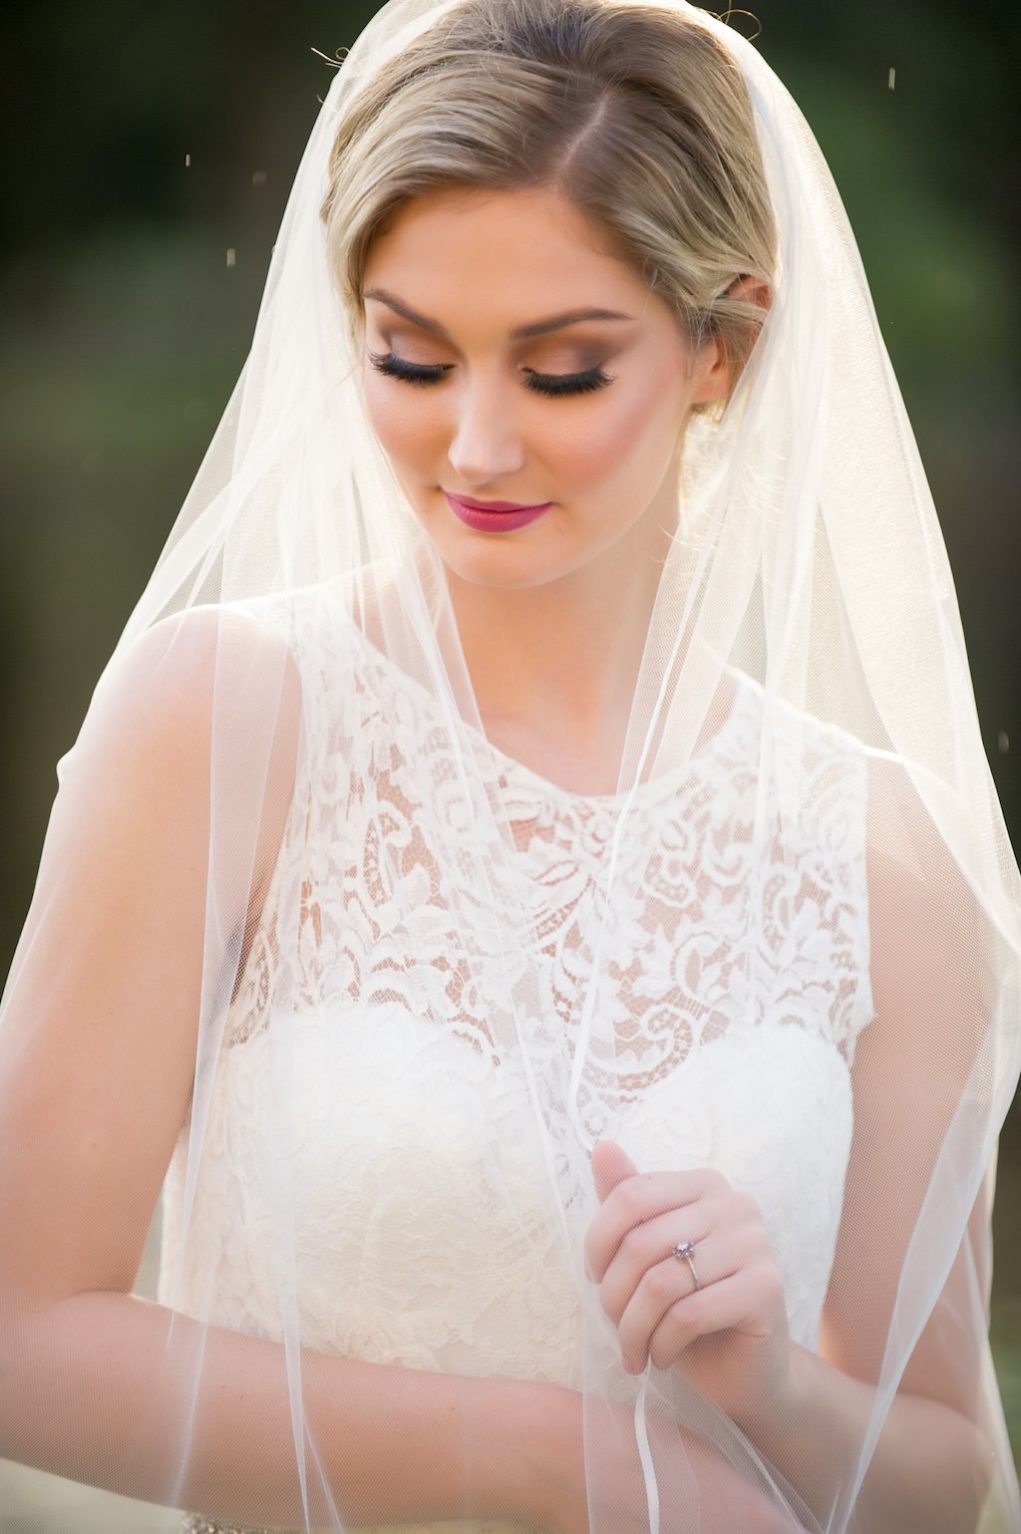 Elegant Traditional Outdoor Garden Bridal Portrait with Veil and White Lace Illusion Wedding Dress | Tampa Bay Wedding Hair and Makeup by Michele Renee the Studio | Tampa, FL Wedding Photographer Andi Diamond Photography | Downtown Tampa Bridal Boutique The Bride Tampa